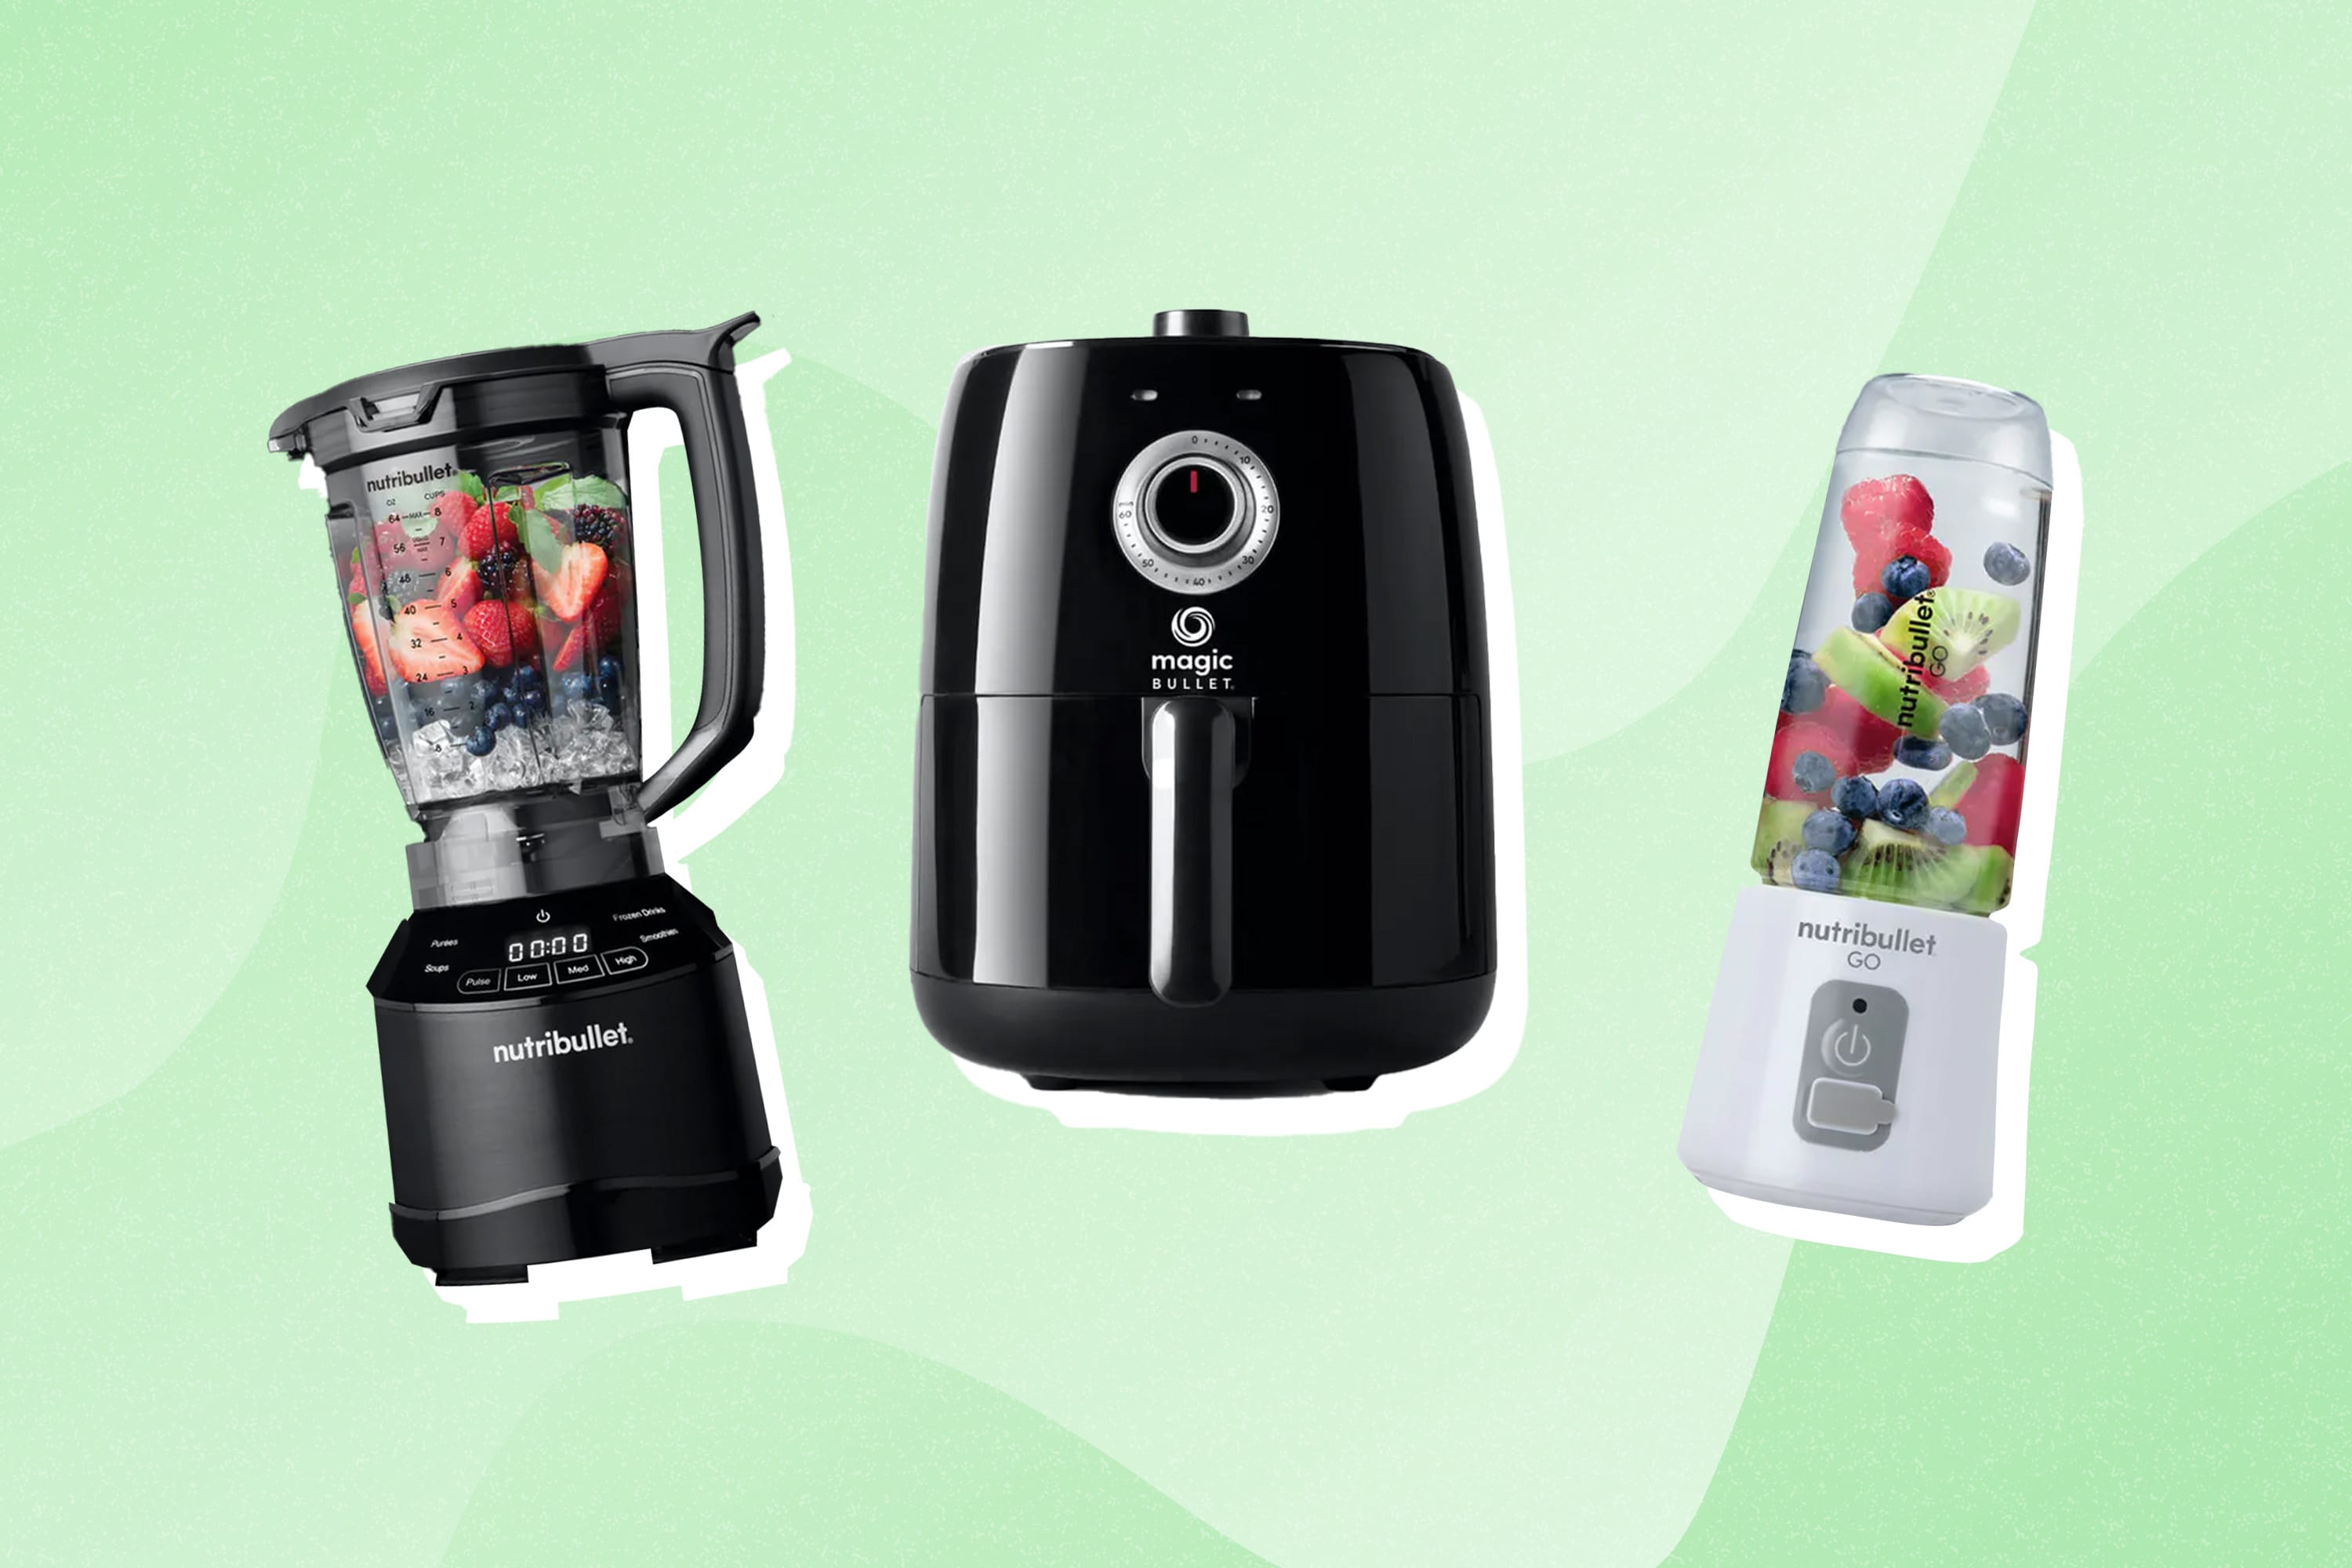 Nutribullet Launches Incredibly Powerful Slow Juicer